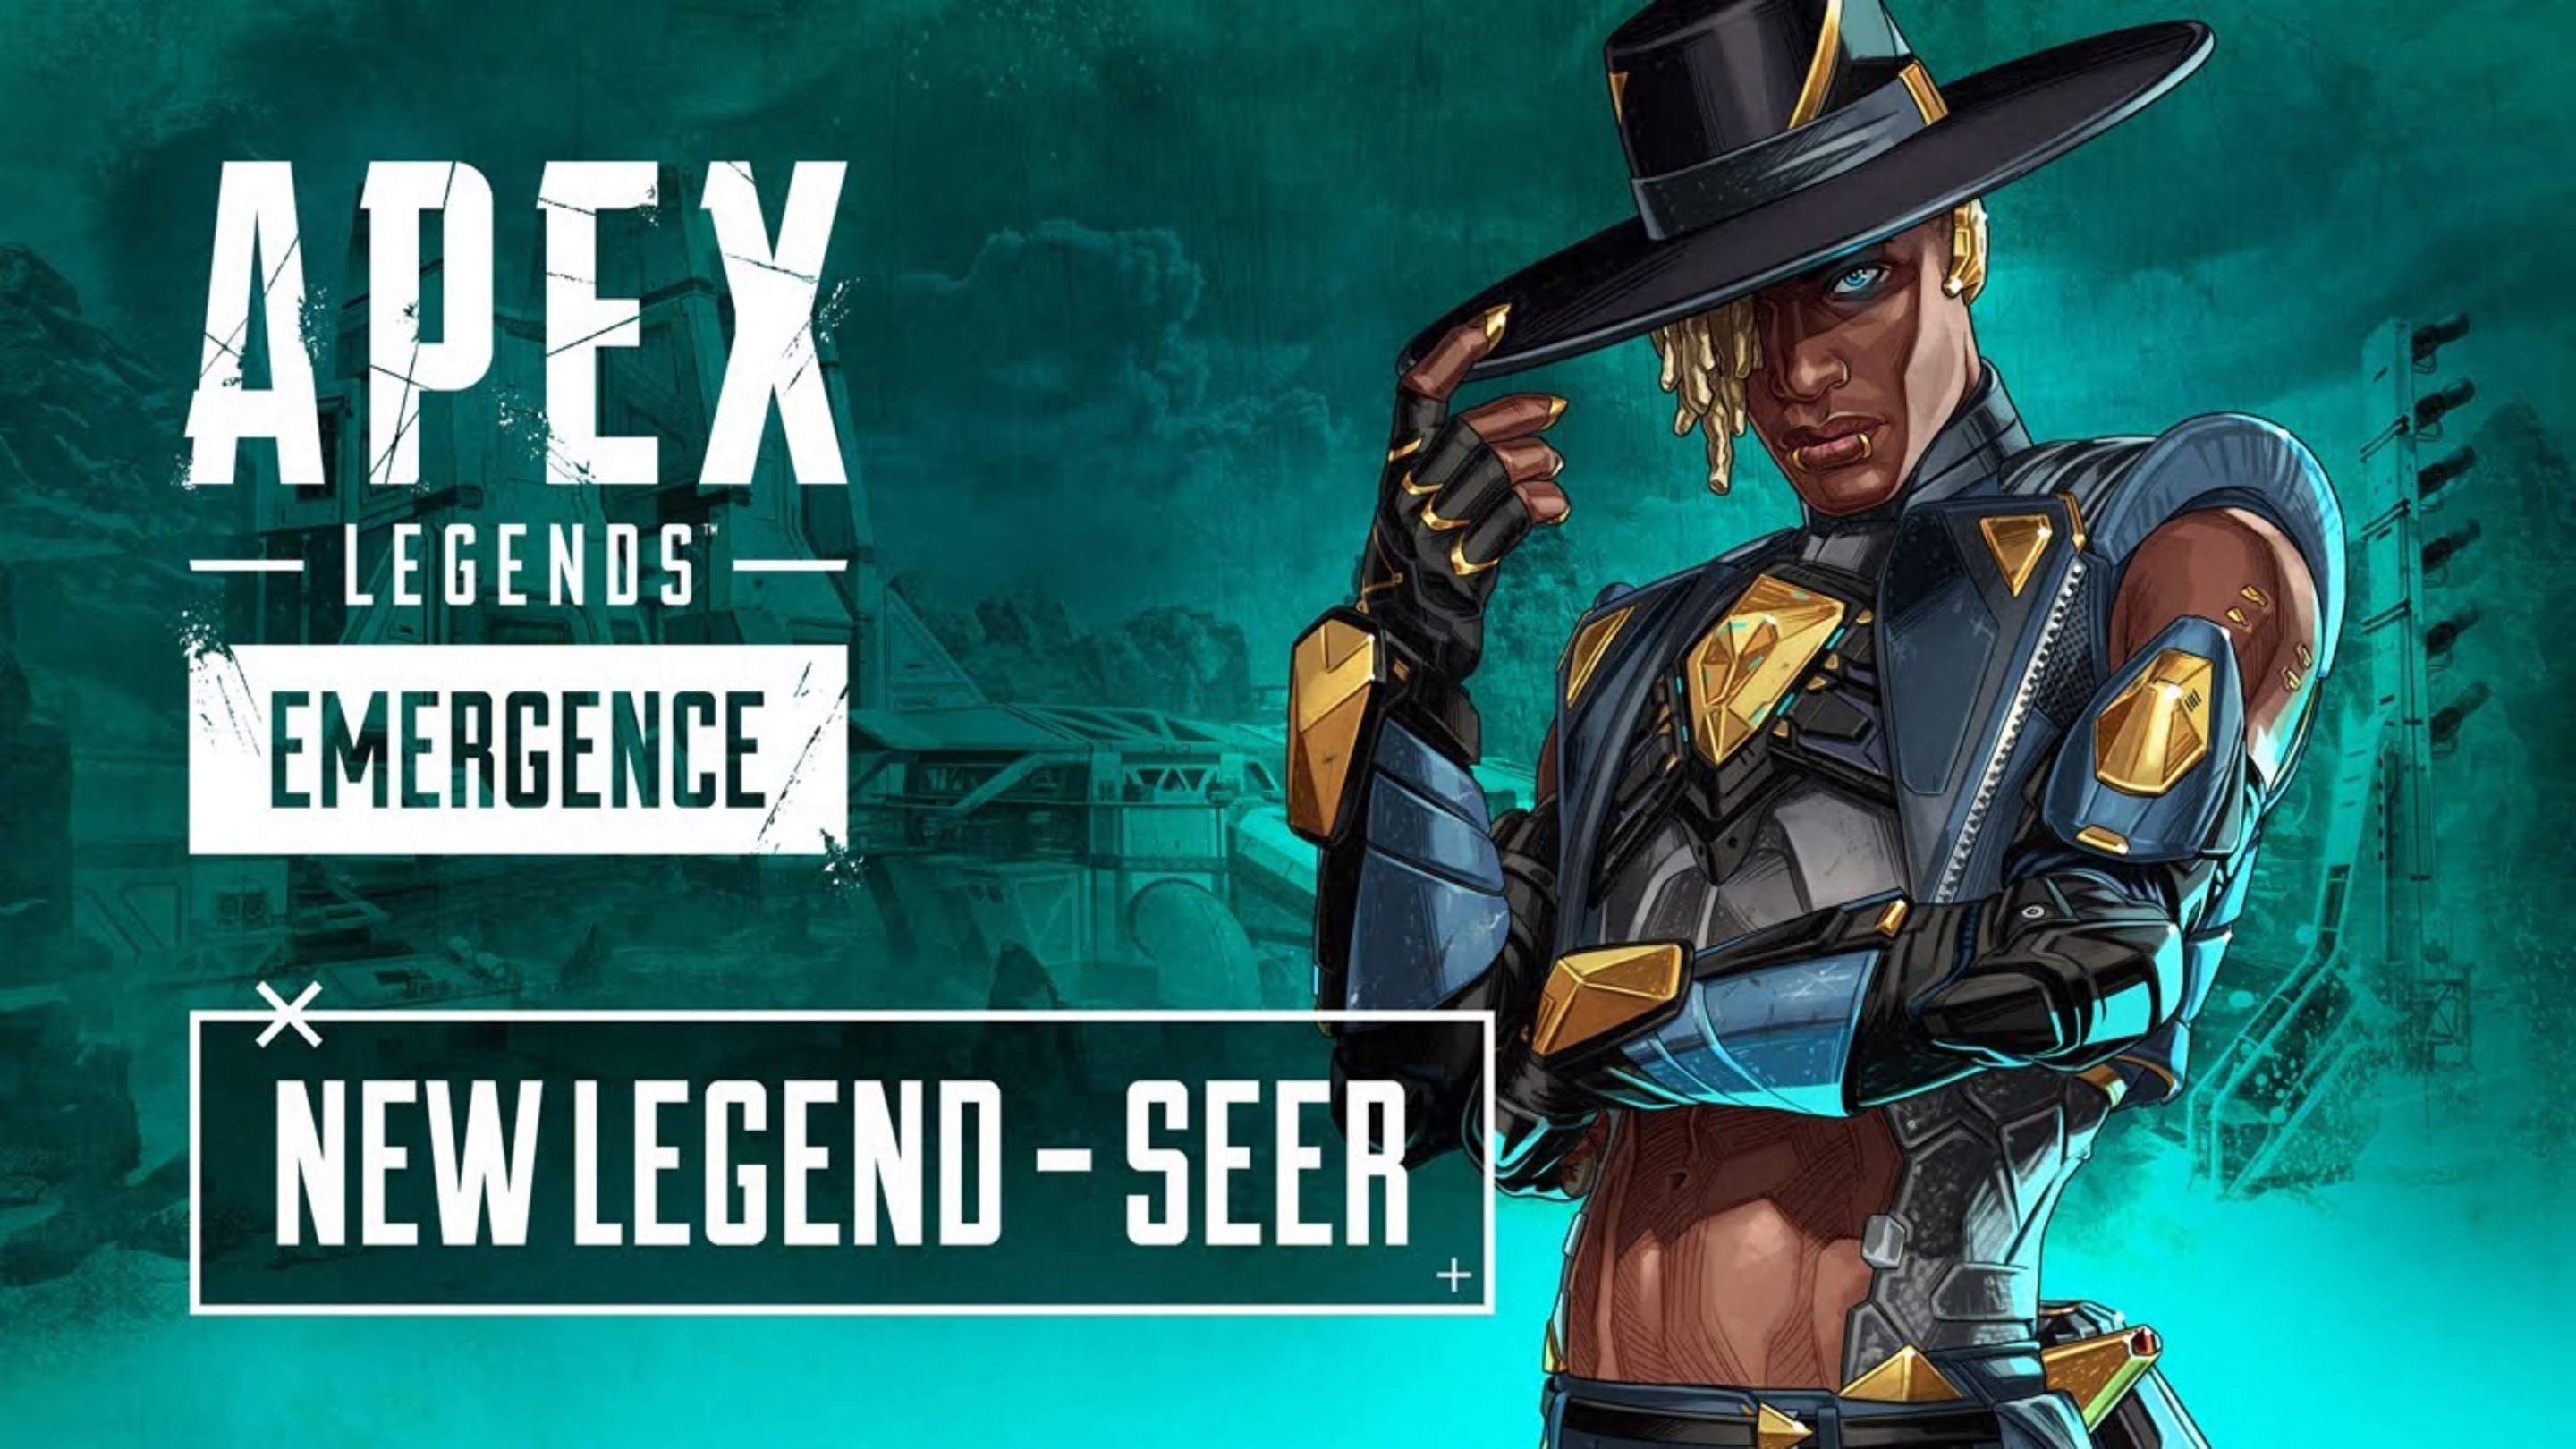 Apex Legends Cross-Progression Leaked in Datamined Files